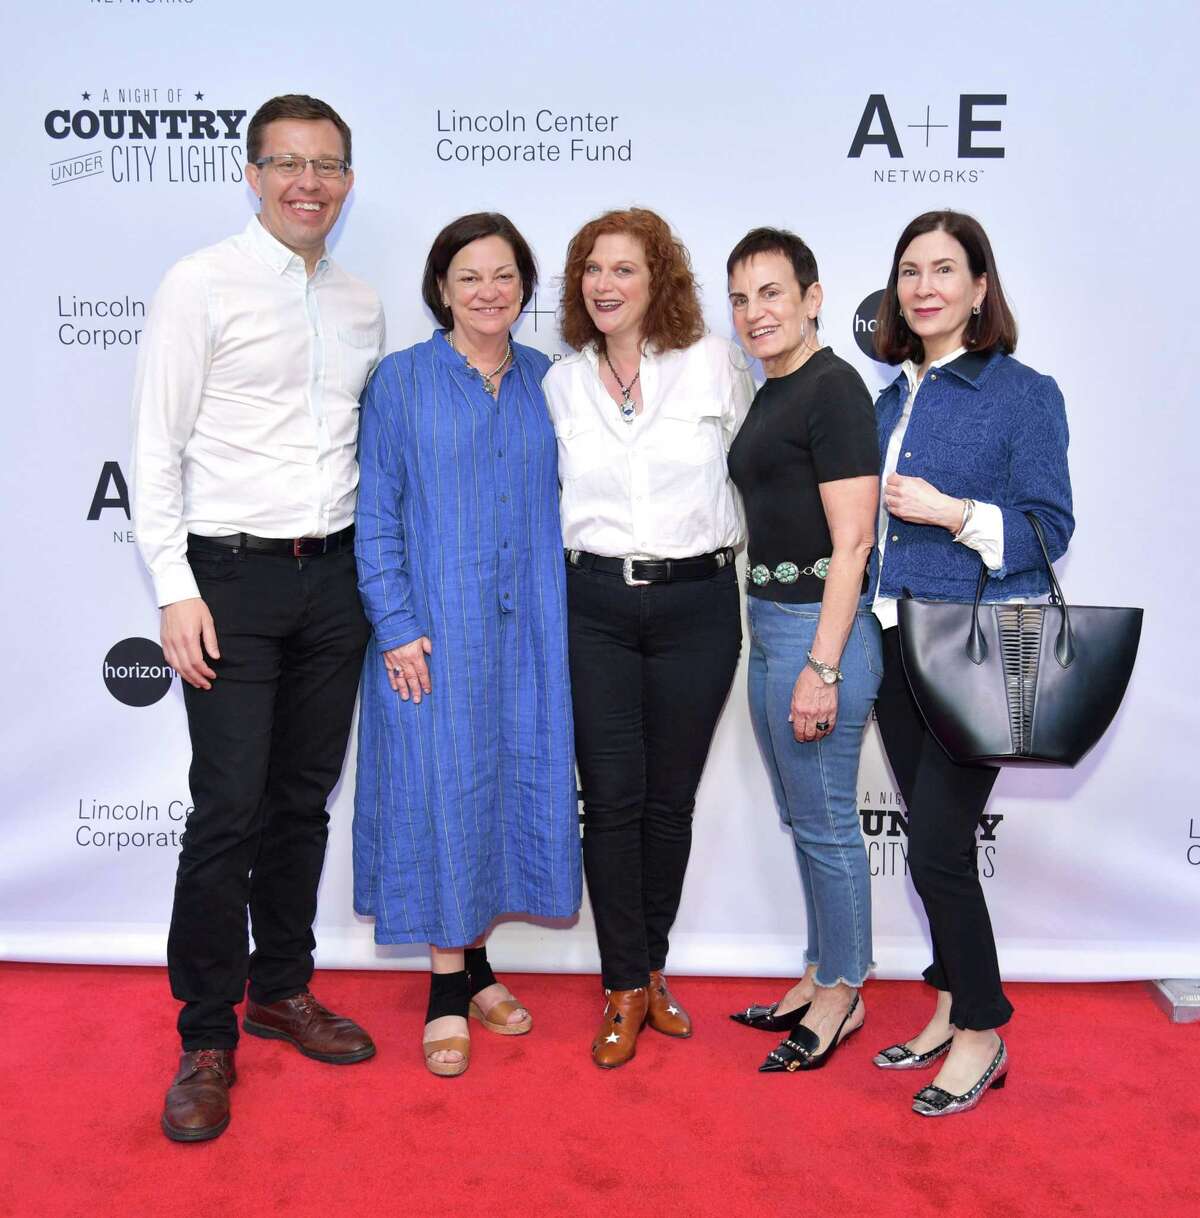 Henry Timms, Frances Resheske, Lois Lieberman, Eileen Matthews and Karen Weiss attend the Night Of Country Under City Lights at Alice Tully Hall, Lincoln Center on May 31, 2019 in New York City.